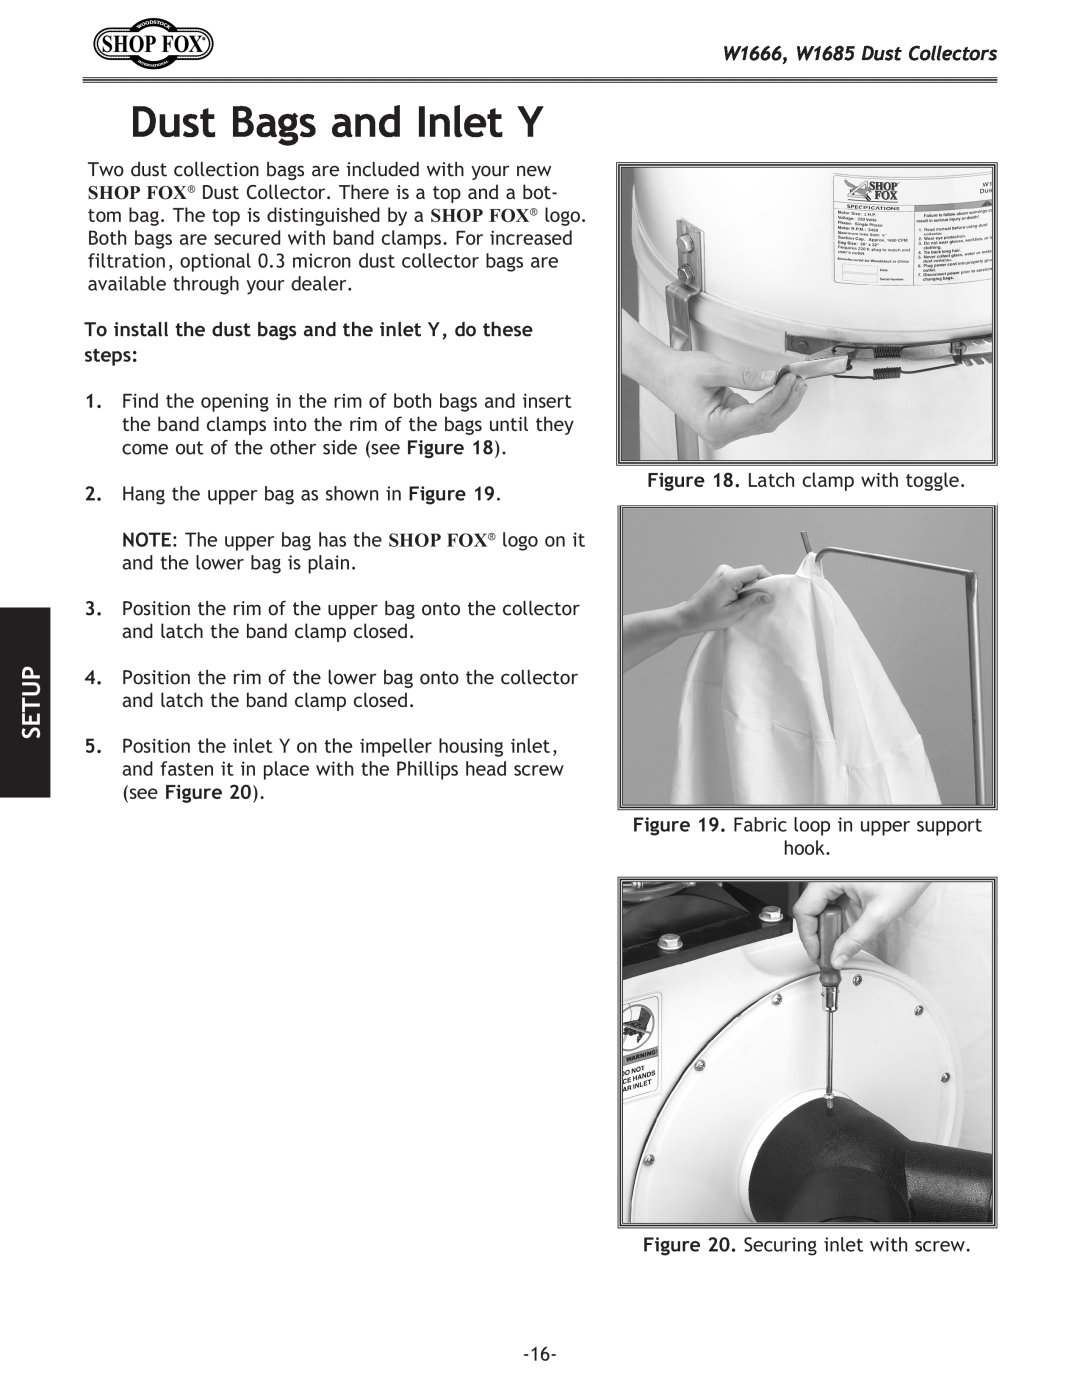 Woodstock DUST COLLECTORS instruction manual Dust Bags and Inlet Y, Setup, W1666, W1685 Dust Collectors 